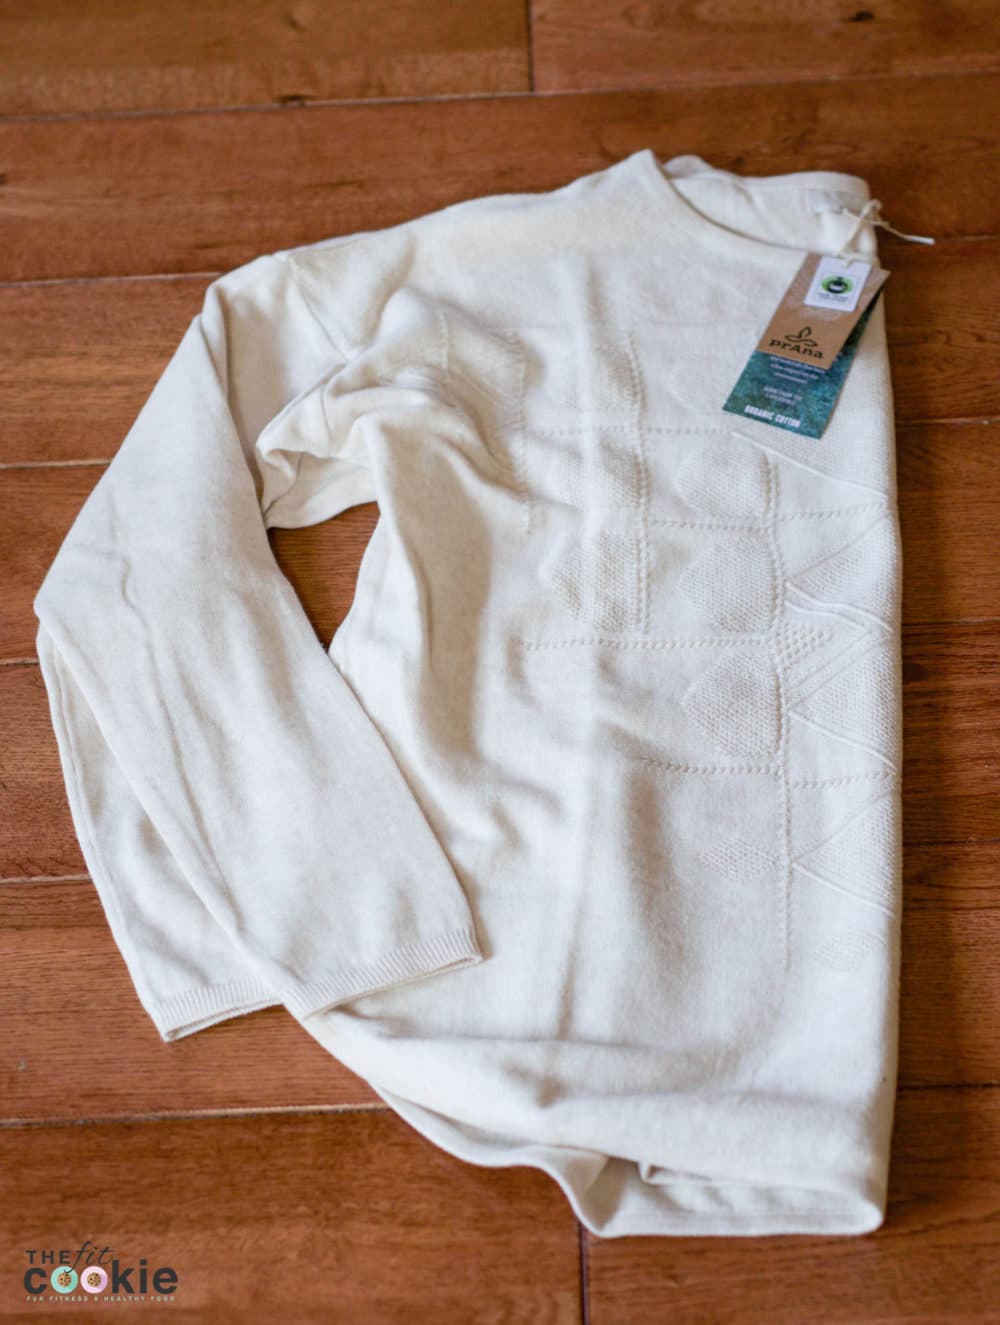 Sustainable and Fair Trade Gifts for Women (plus a @prAna discount code!) - @TheFitCookie #ad #LoveprAna #coupon #gifts 